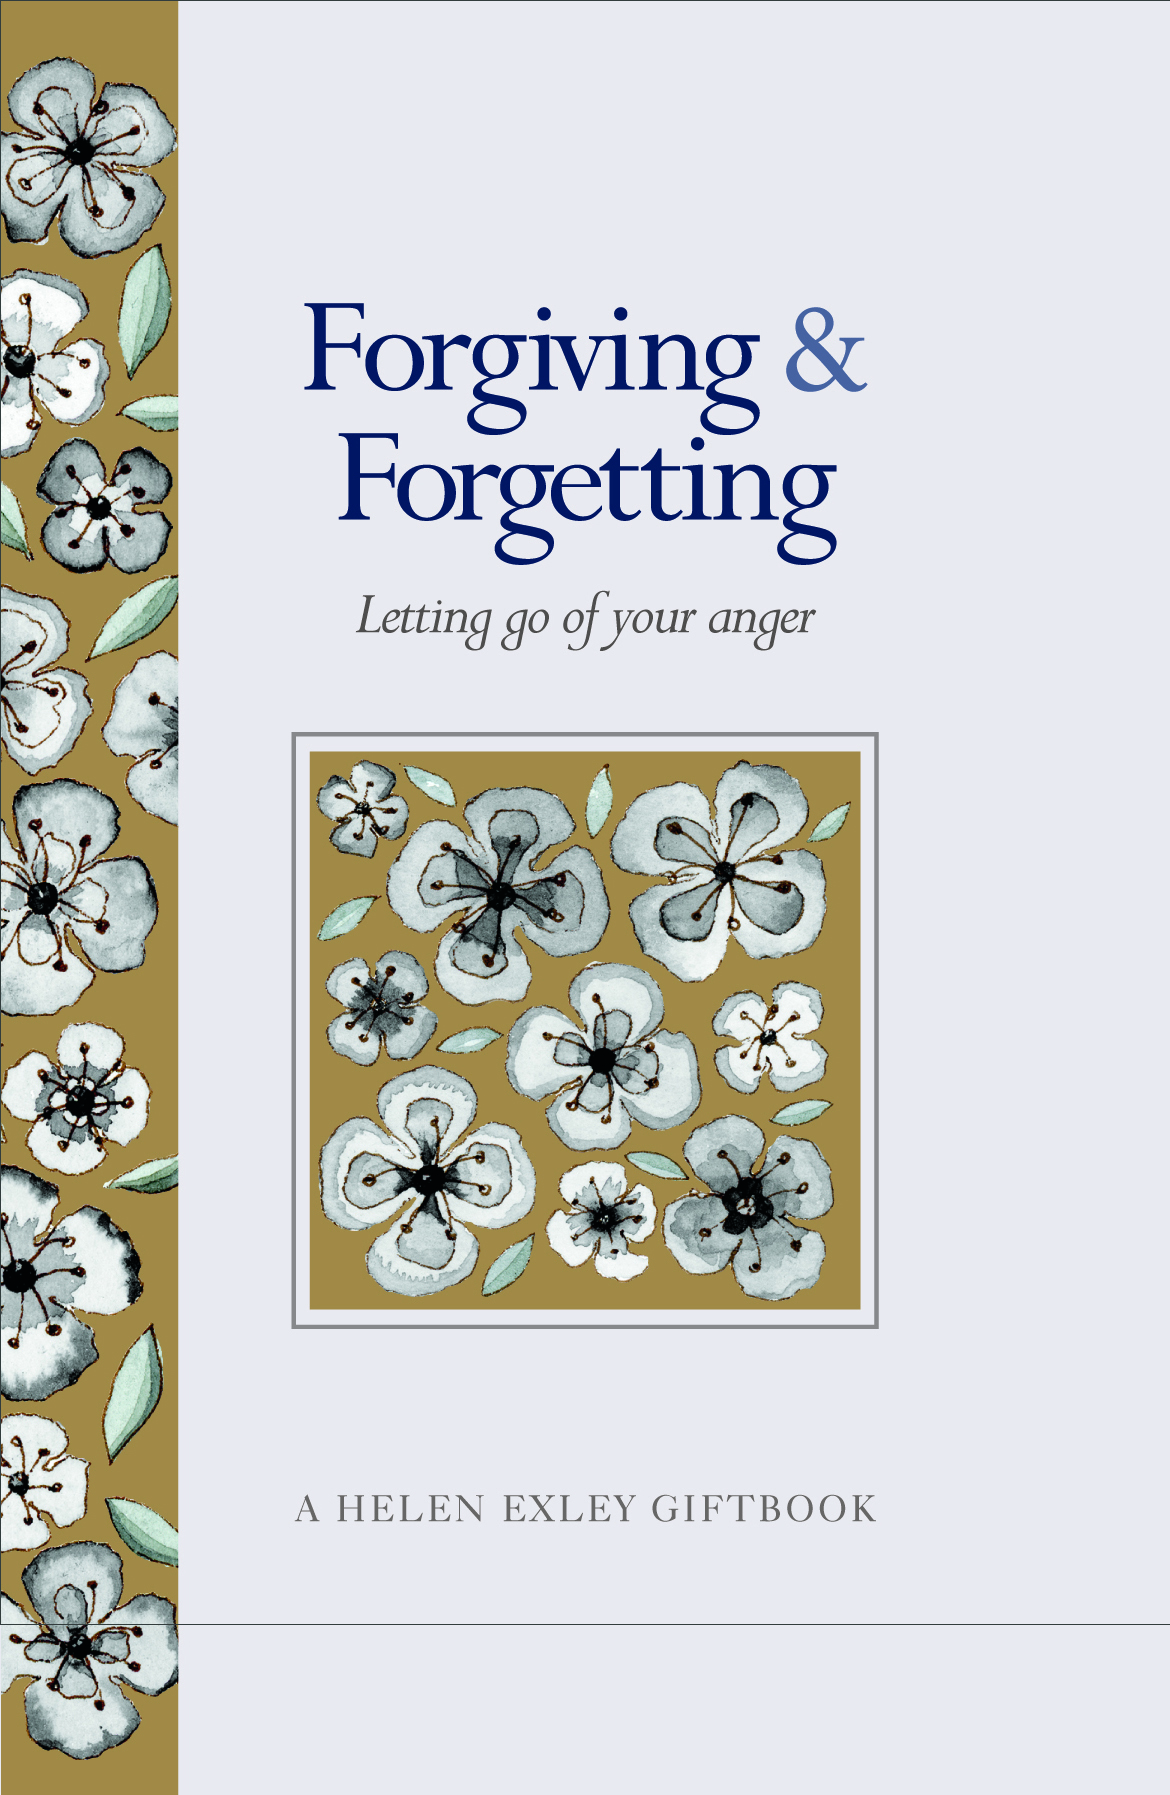 HE GIFTS Forgiving & Forgetting